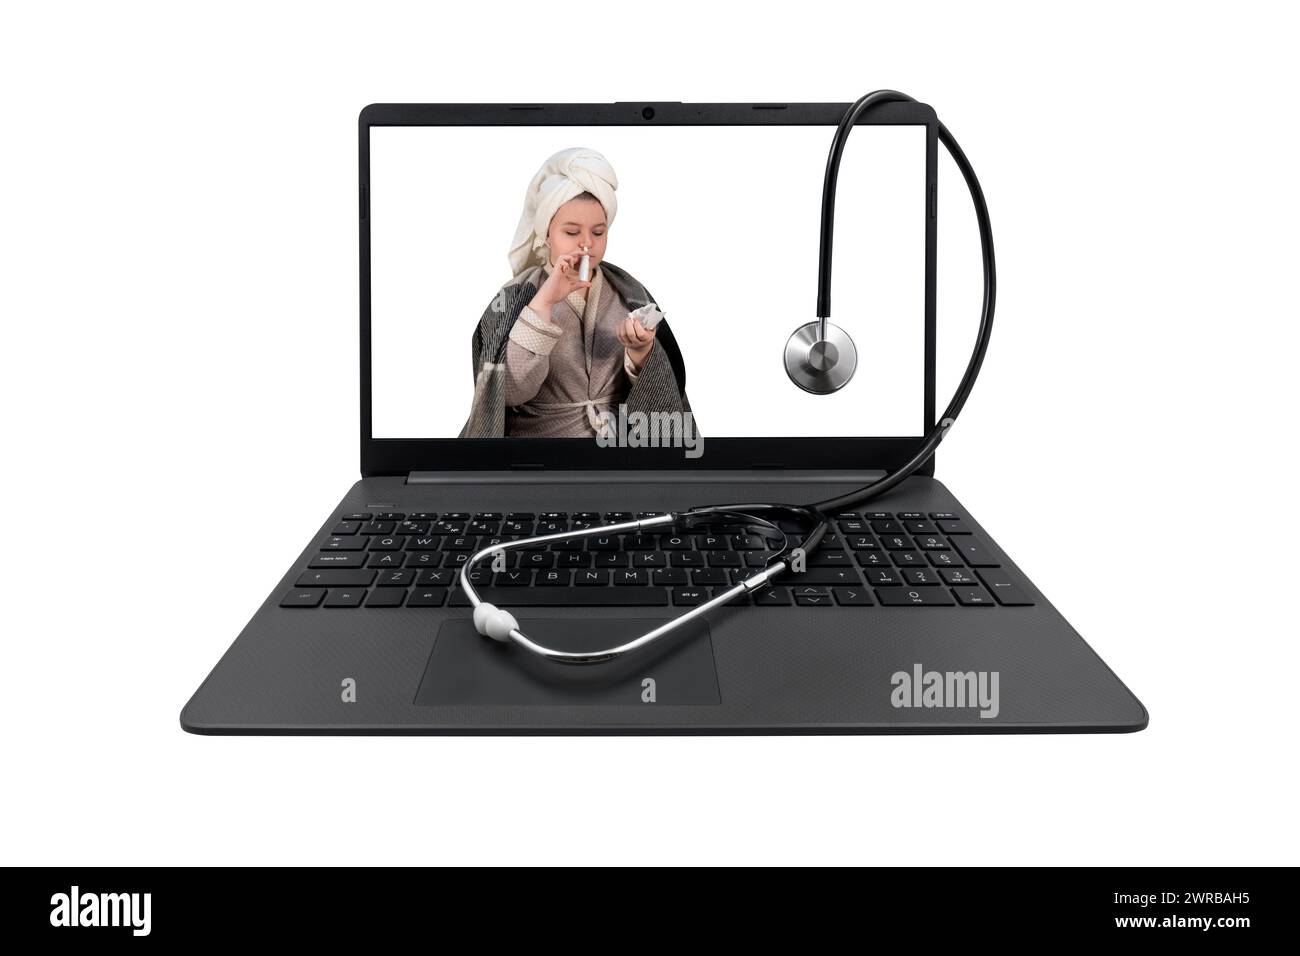 Laptop and medical stethoscope isolated on white background. On the laptop screen - a girl with cold symptoms injects a spray into her nose Stock Photo